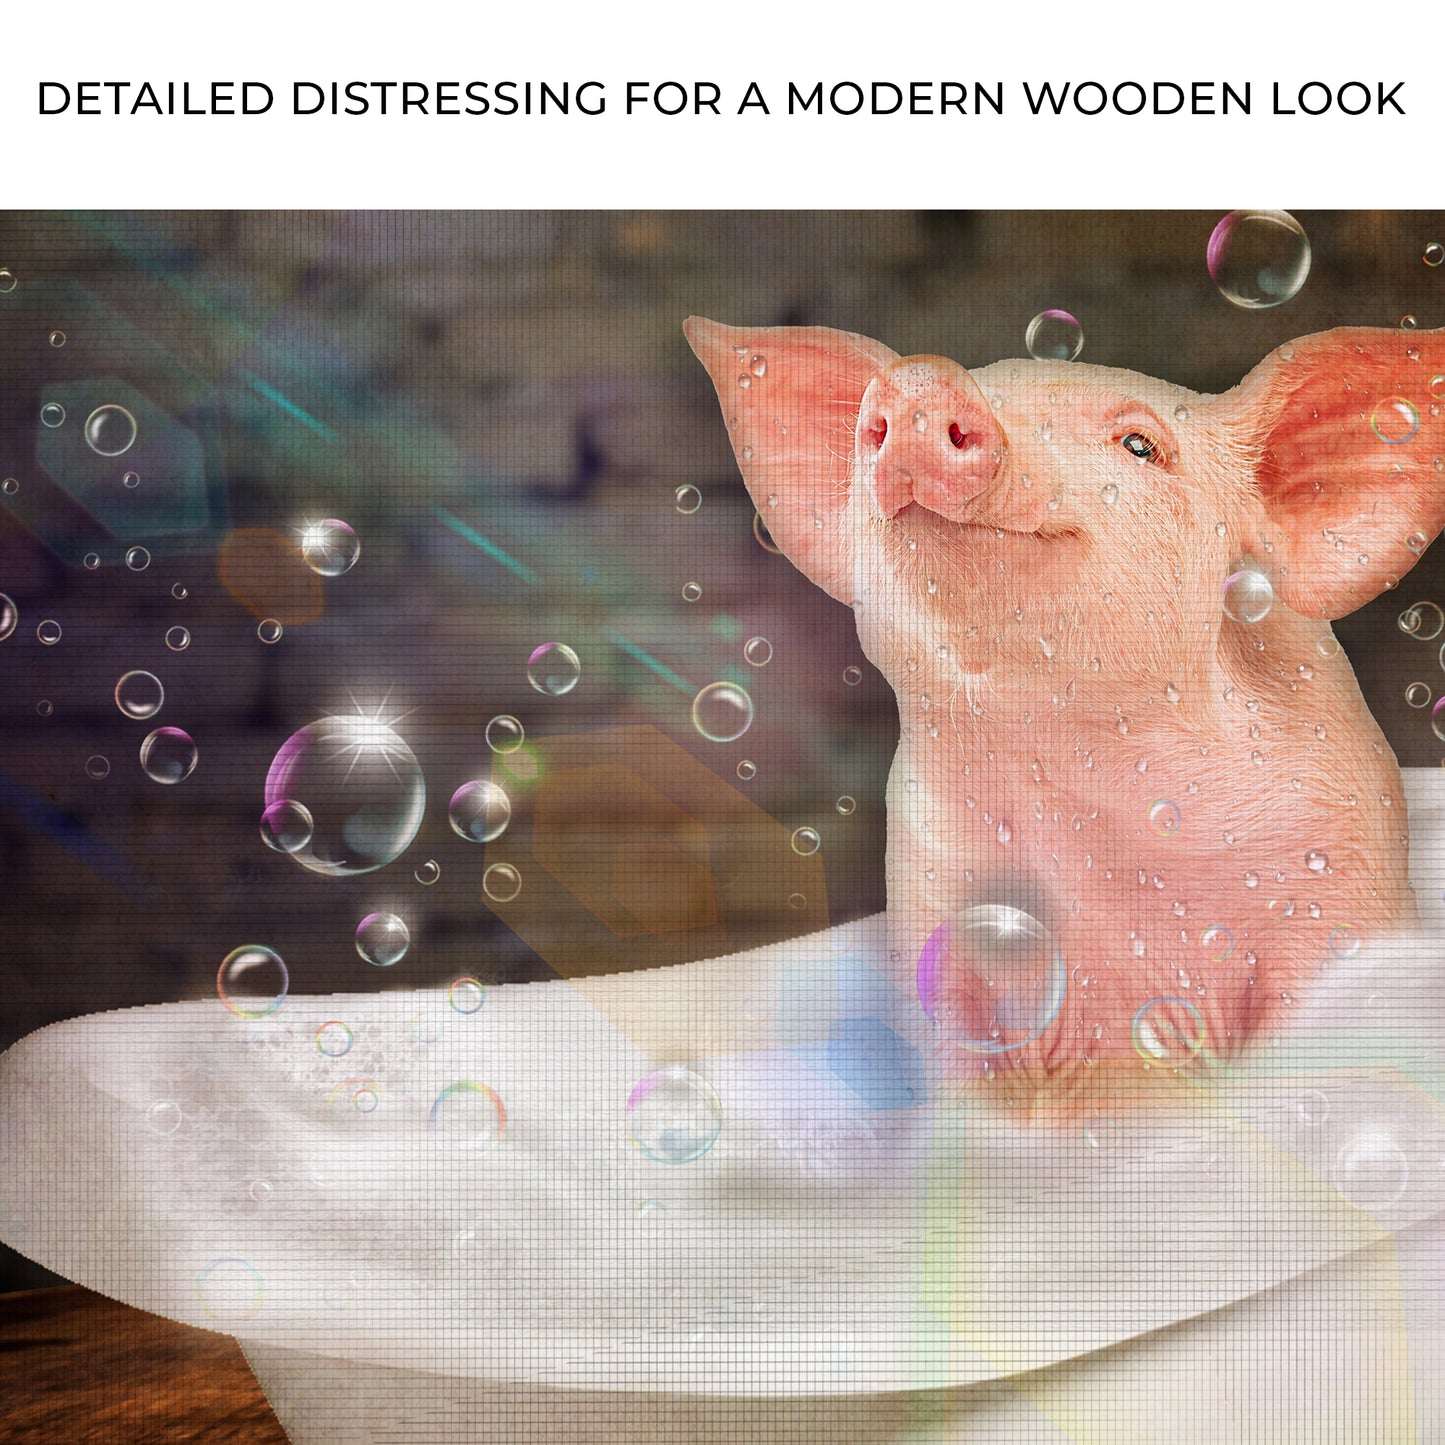 Bubble Bath Pig In Tub Canvas Wall Art Zoom - Image by Tailored Canvases